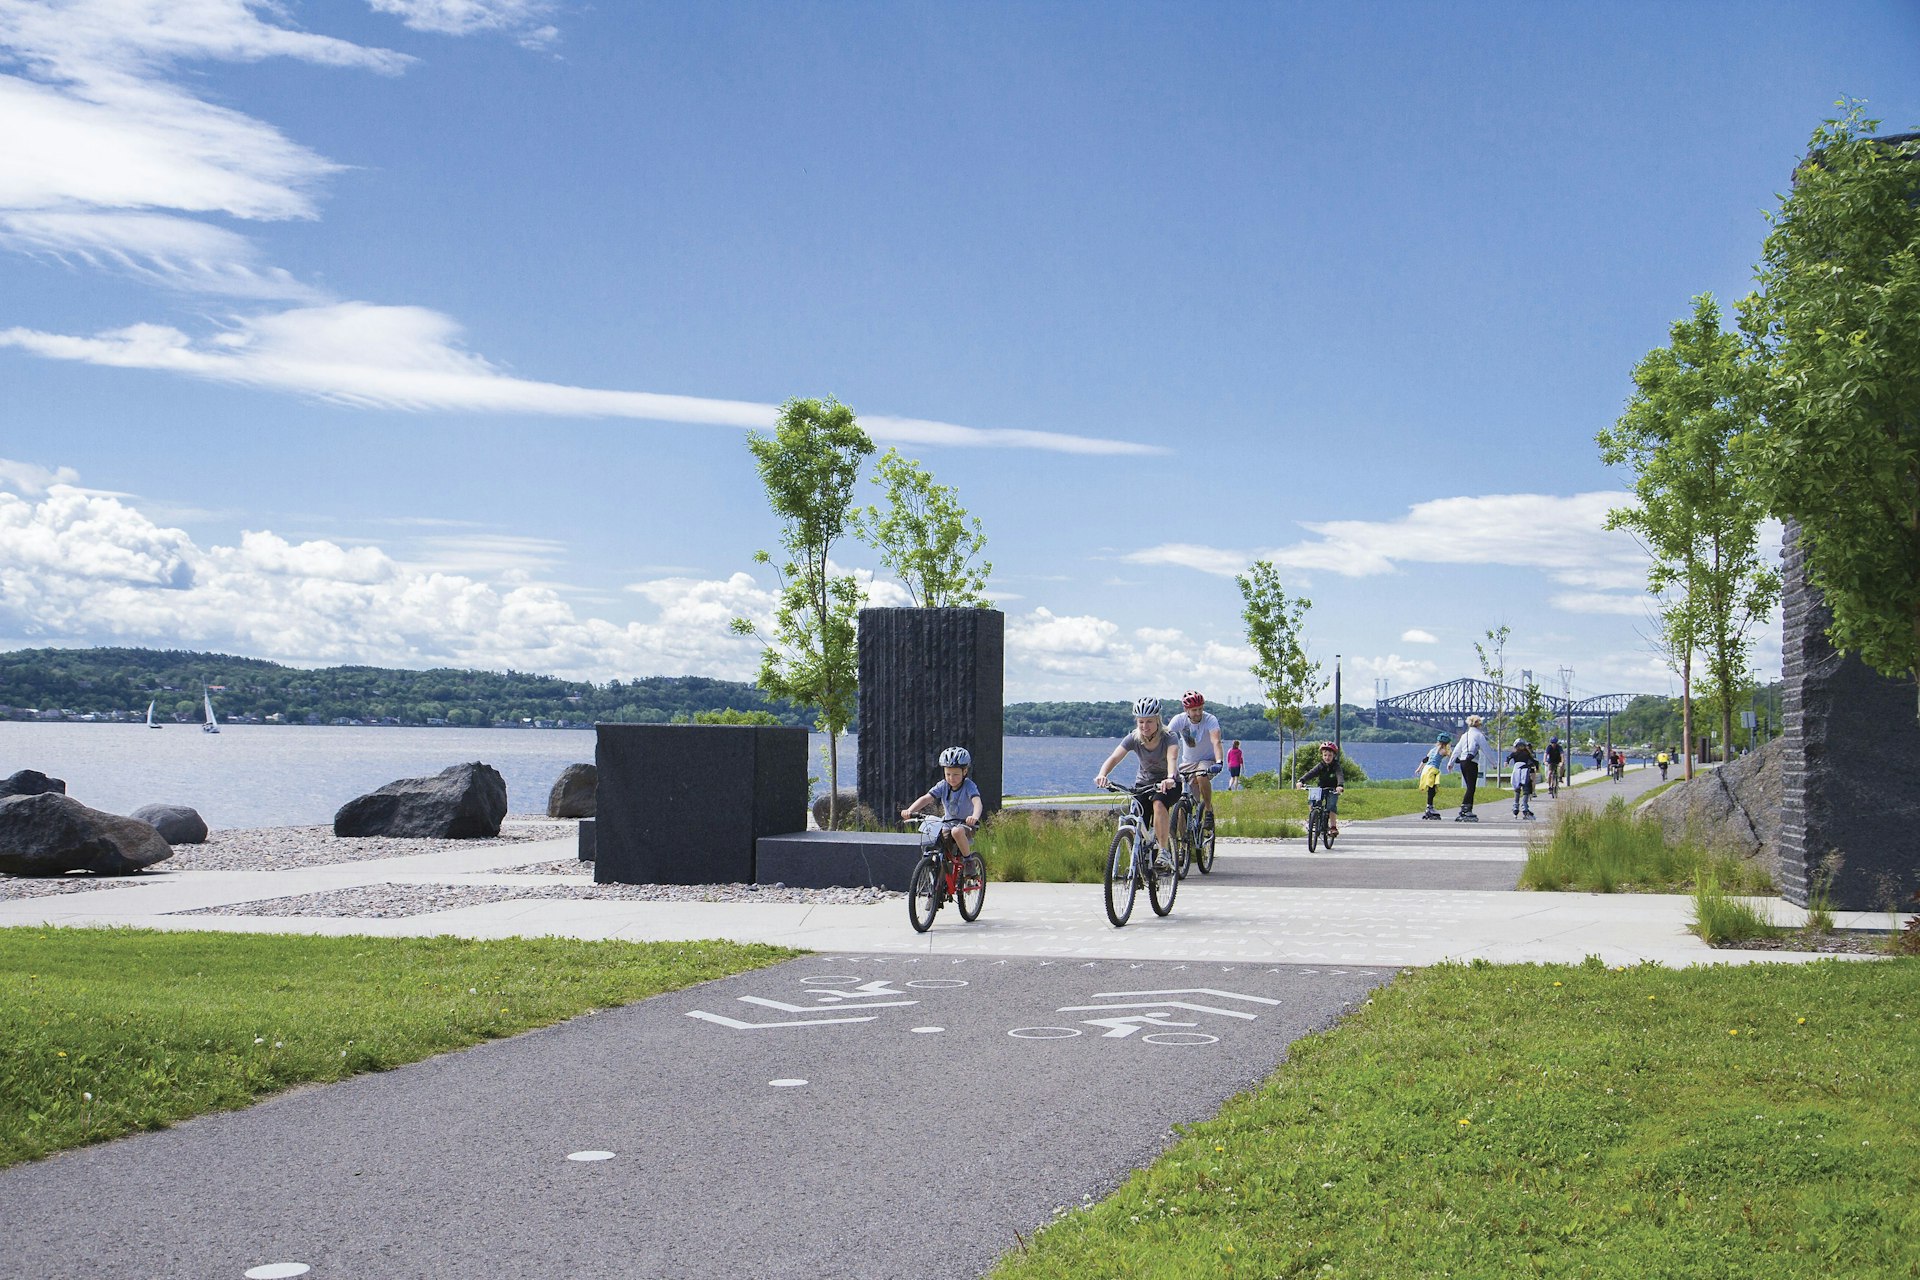 Cyclists on a bike path by the St-Lawrence River in Québec City, Québec, Canada